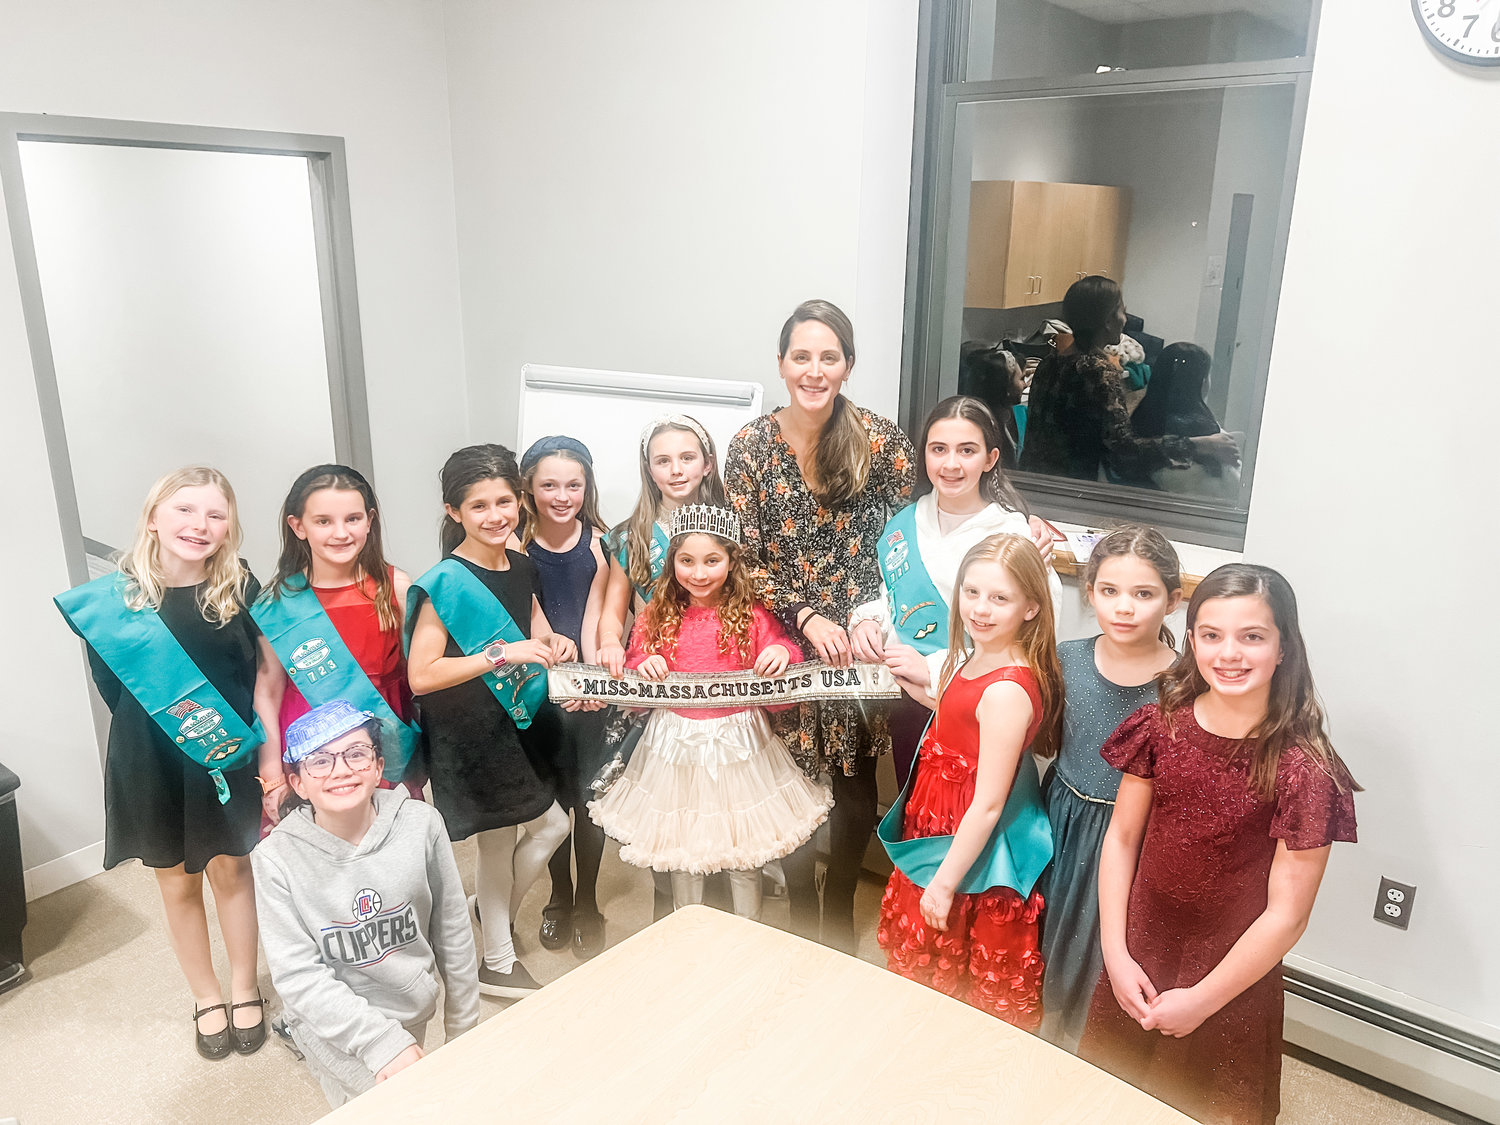 Members of Barrington Junior Troop 723 pose for a photo with Cristina Nardozzi Buehrer following a special event earlier this month. Pictured are (from left to right) Addison Lubelczyk, Claire Egal, Graysen Mello-Dumas (kneeling), Avery Martin, Grace Gavigan, Camille Piccerelli, Ava Buehrer, Cristina Nardozzi Buehrer, Laura Thurston, Lily DiAngelo, Claire Moniz, and Emma Valentine.